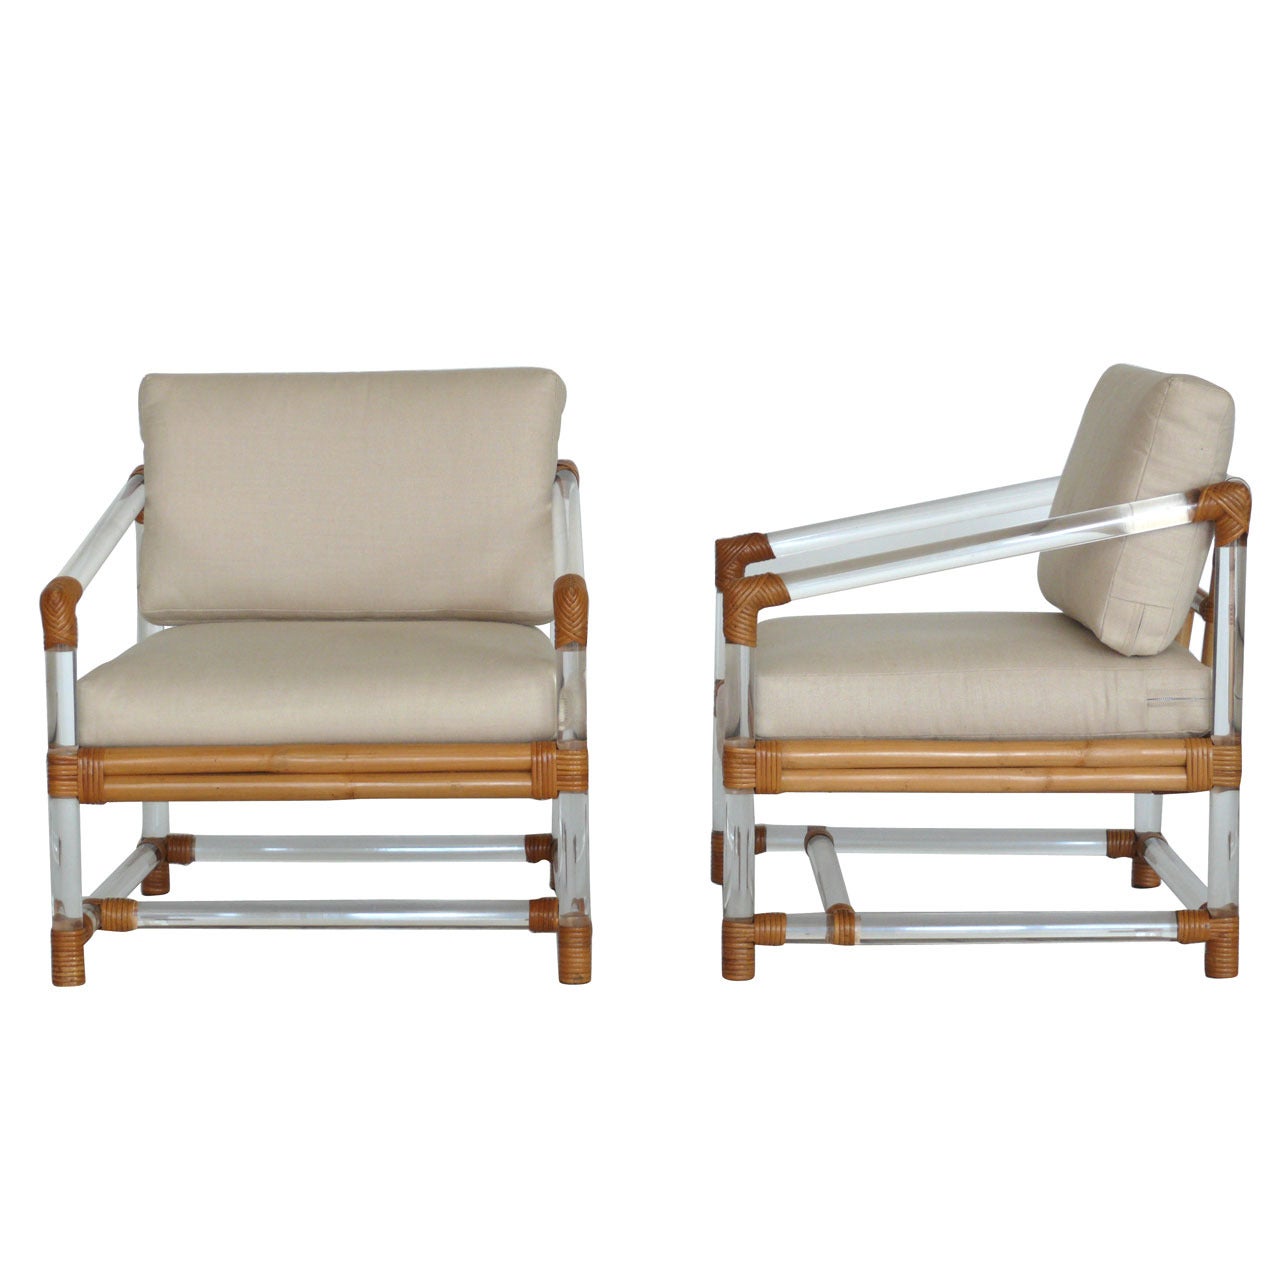 Lucite and Bamboo Club Chairs by McGuire for Four Seasons